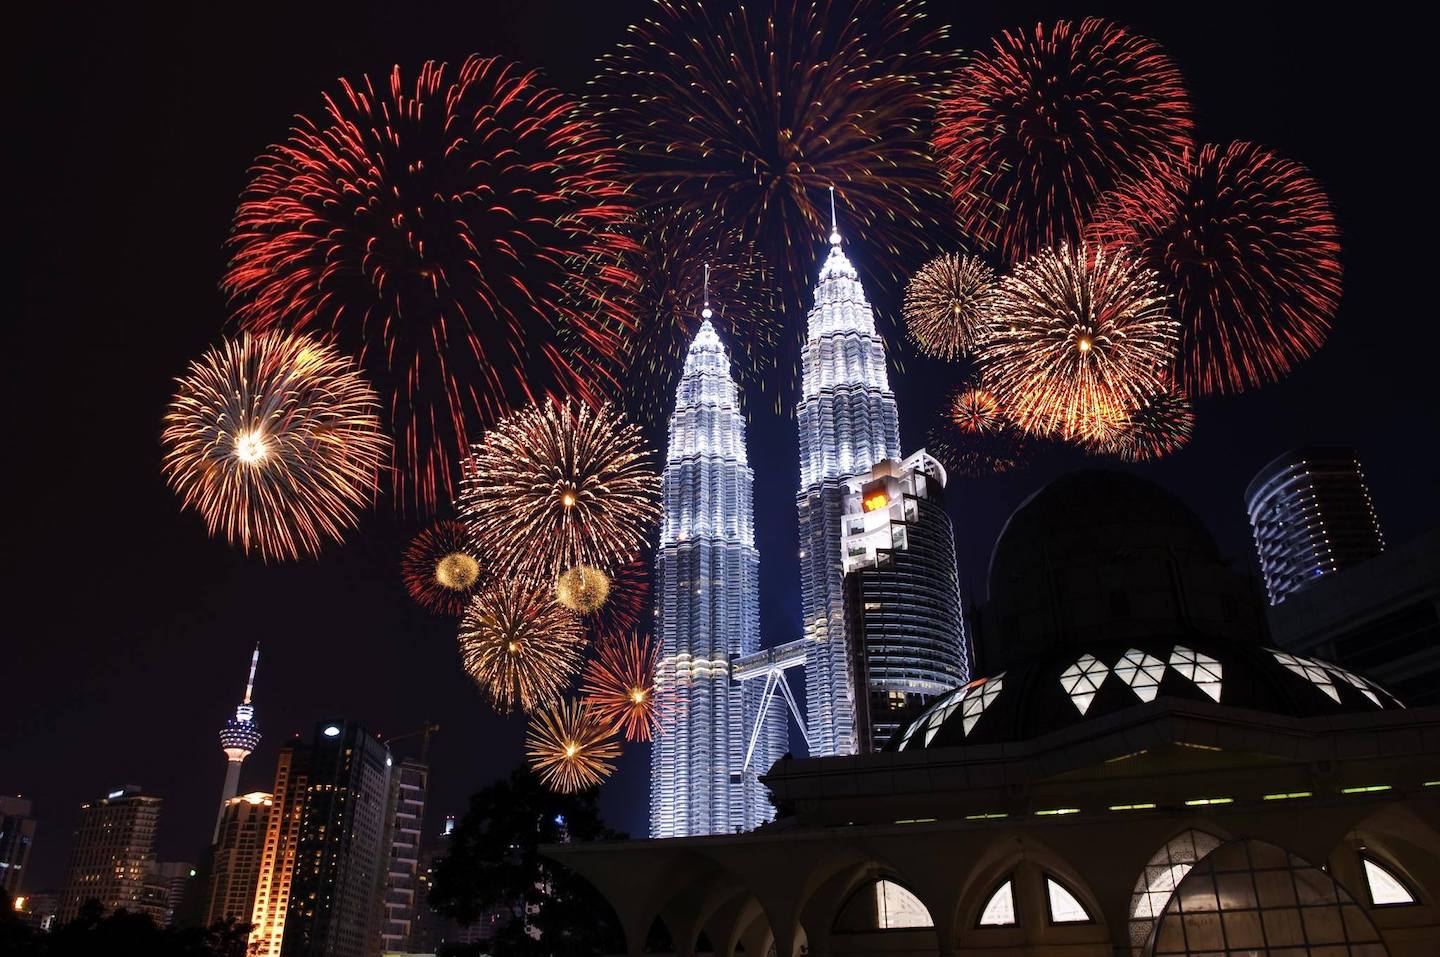 Malaysia's NYE Countdown: Tune In for Live Streaming of Kuala Lumpur's New Year's Eve Fireworks at Petronas Twin Towers